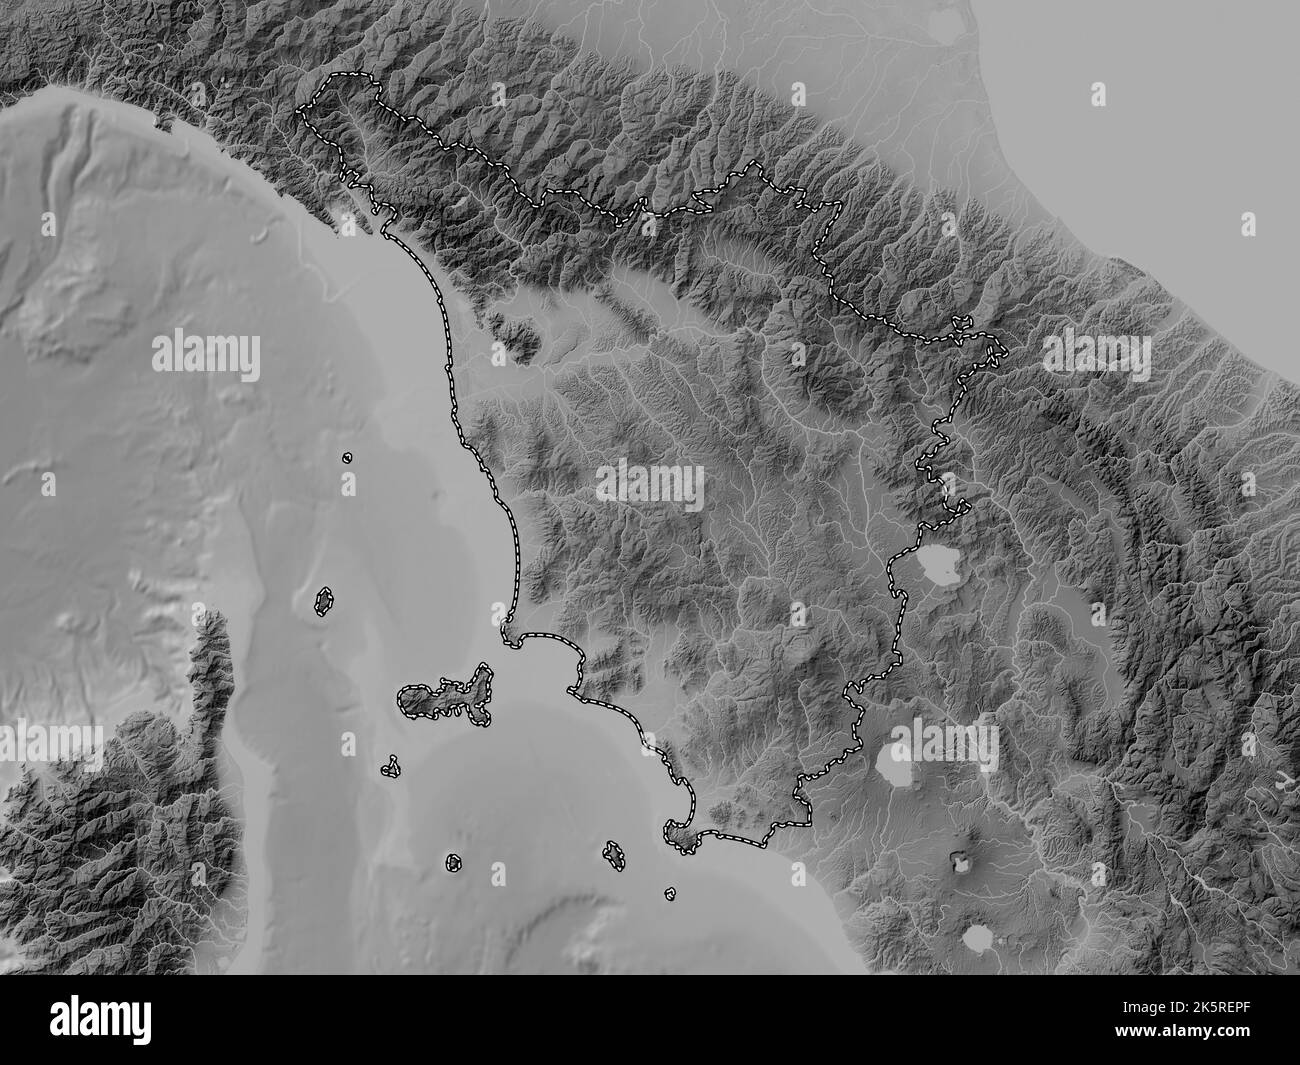 Toscana, region of Italy. Grayscale elevation map with lakes and rivers Stock Photo